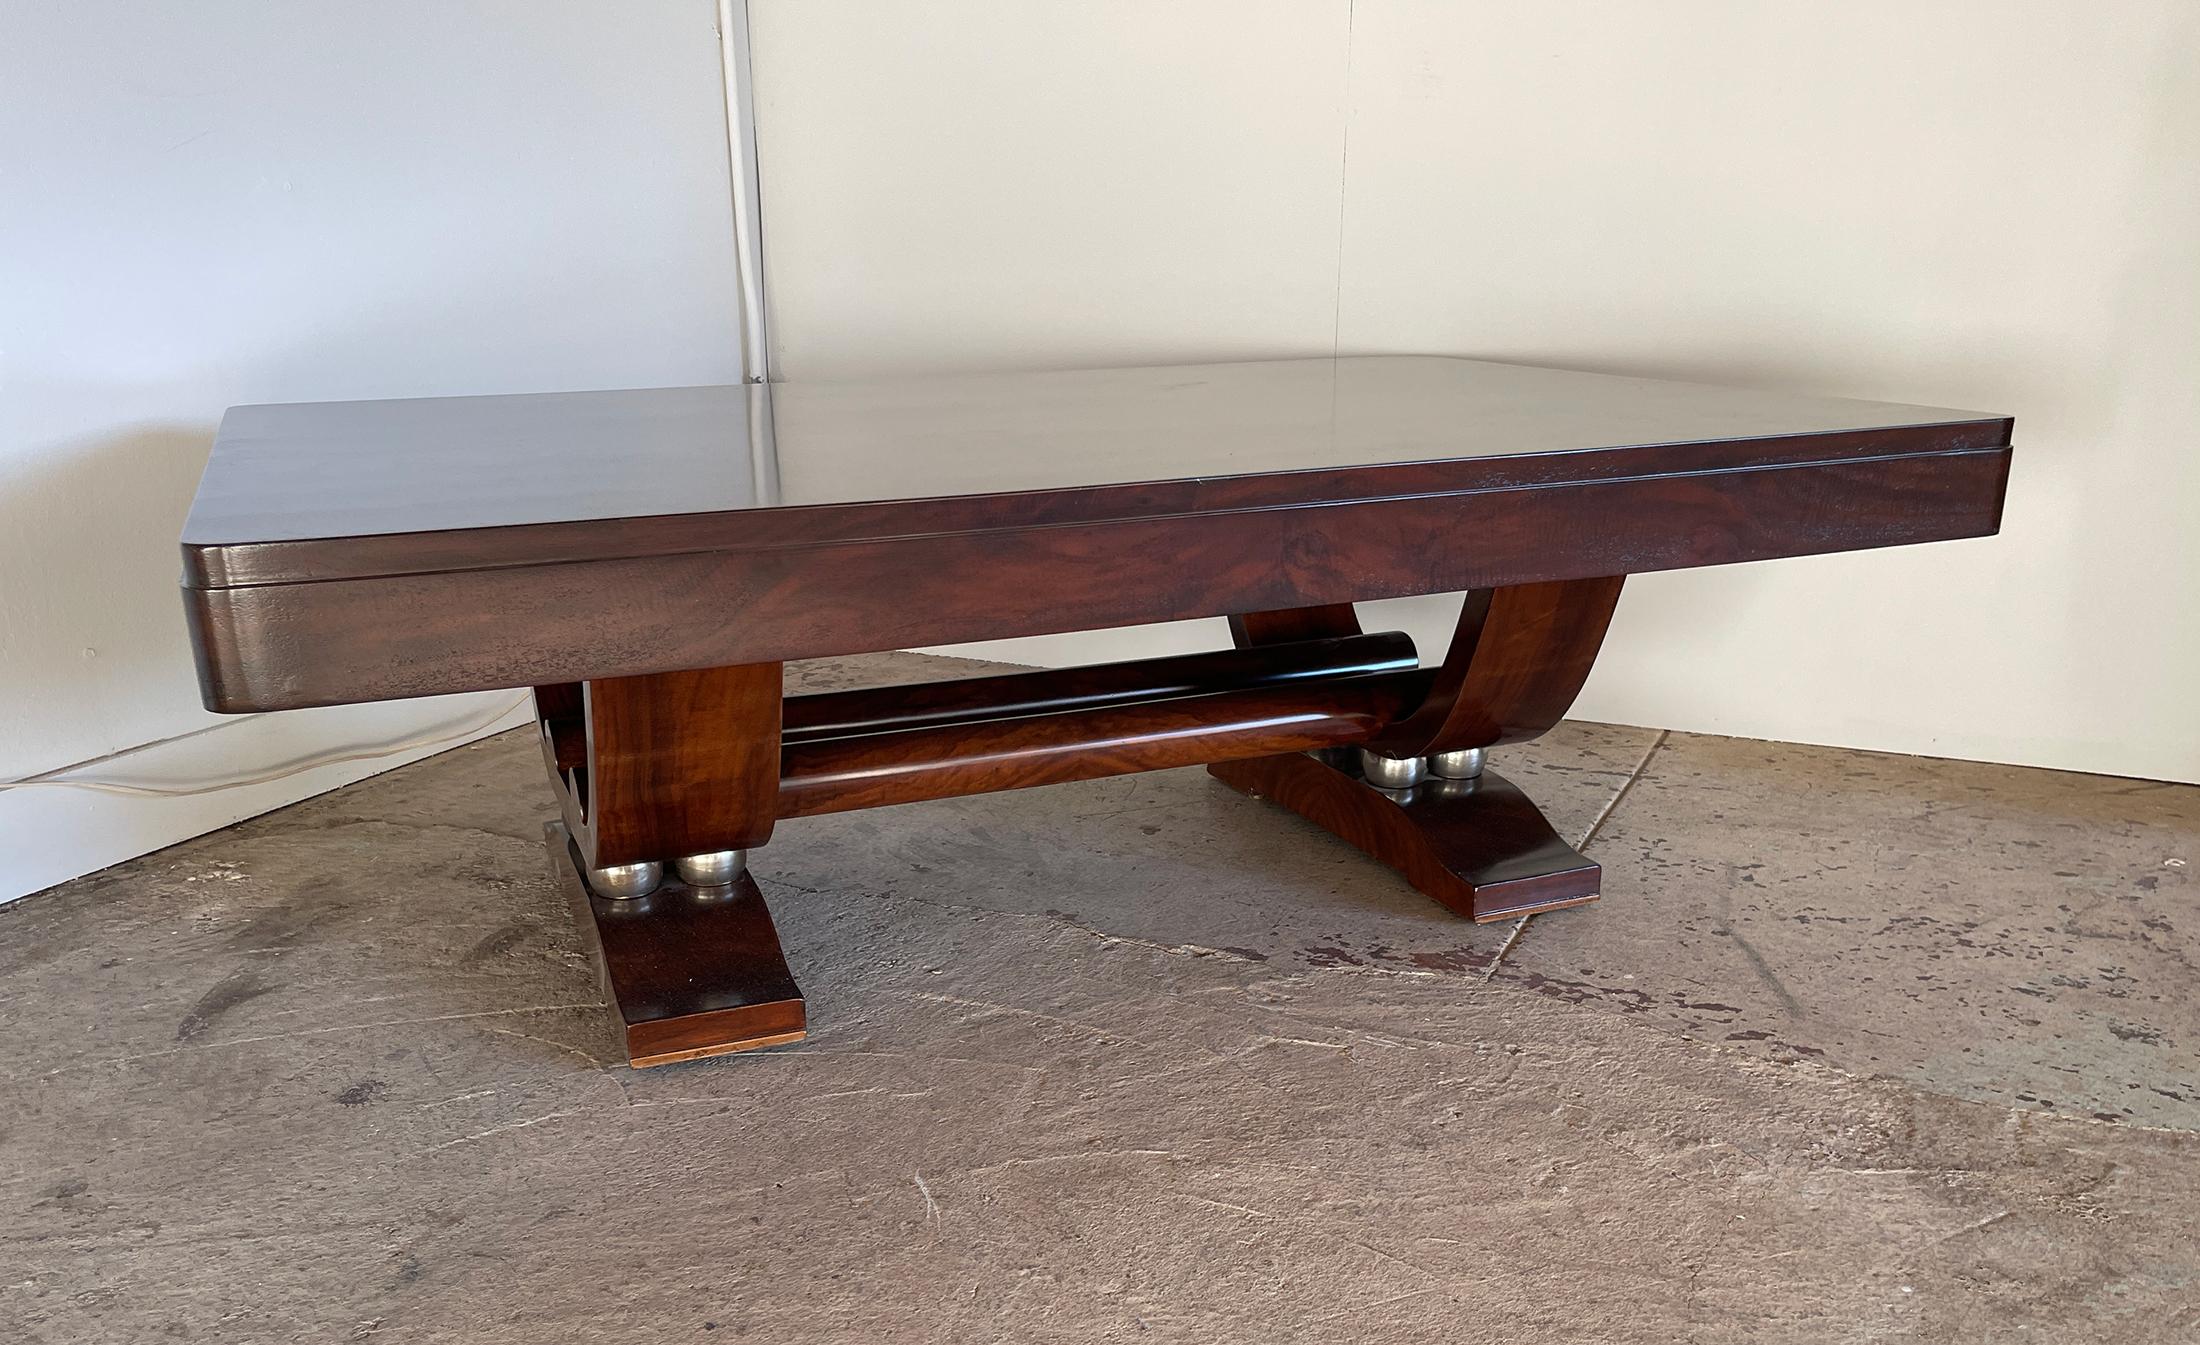 Mid-20th Century French Art Deco Coffee Table 1930-1940, Rene Prou